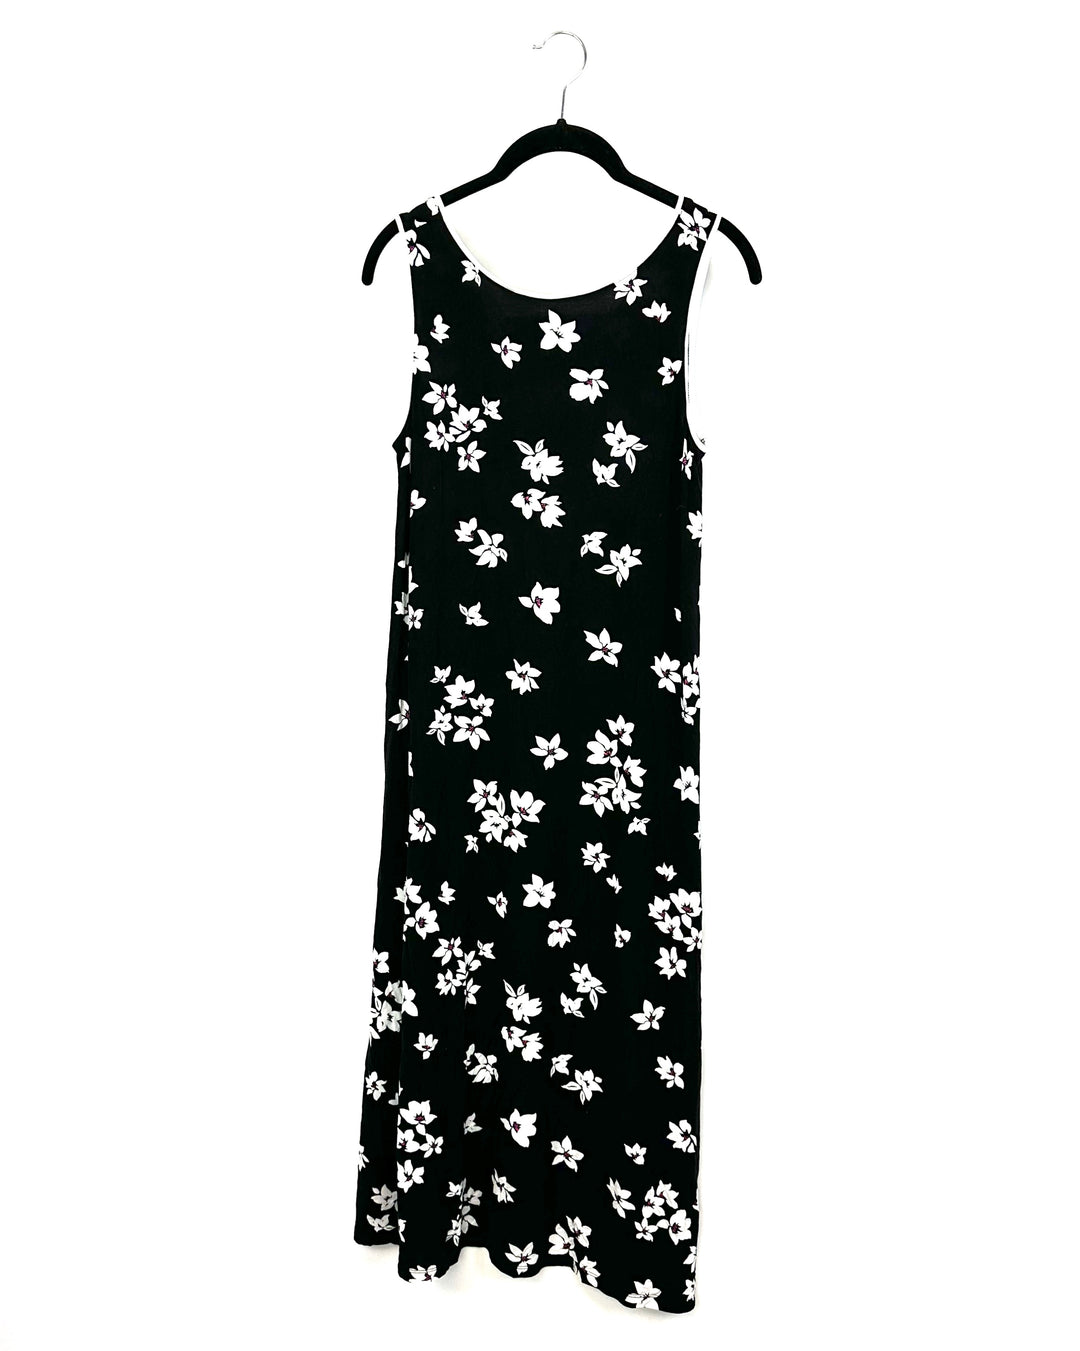 Black and White Flower Nightgown - Small